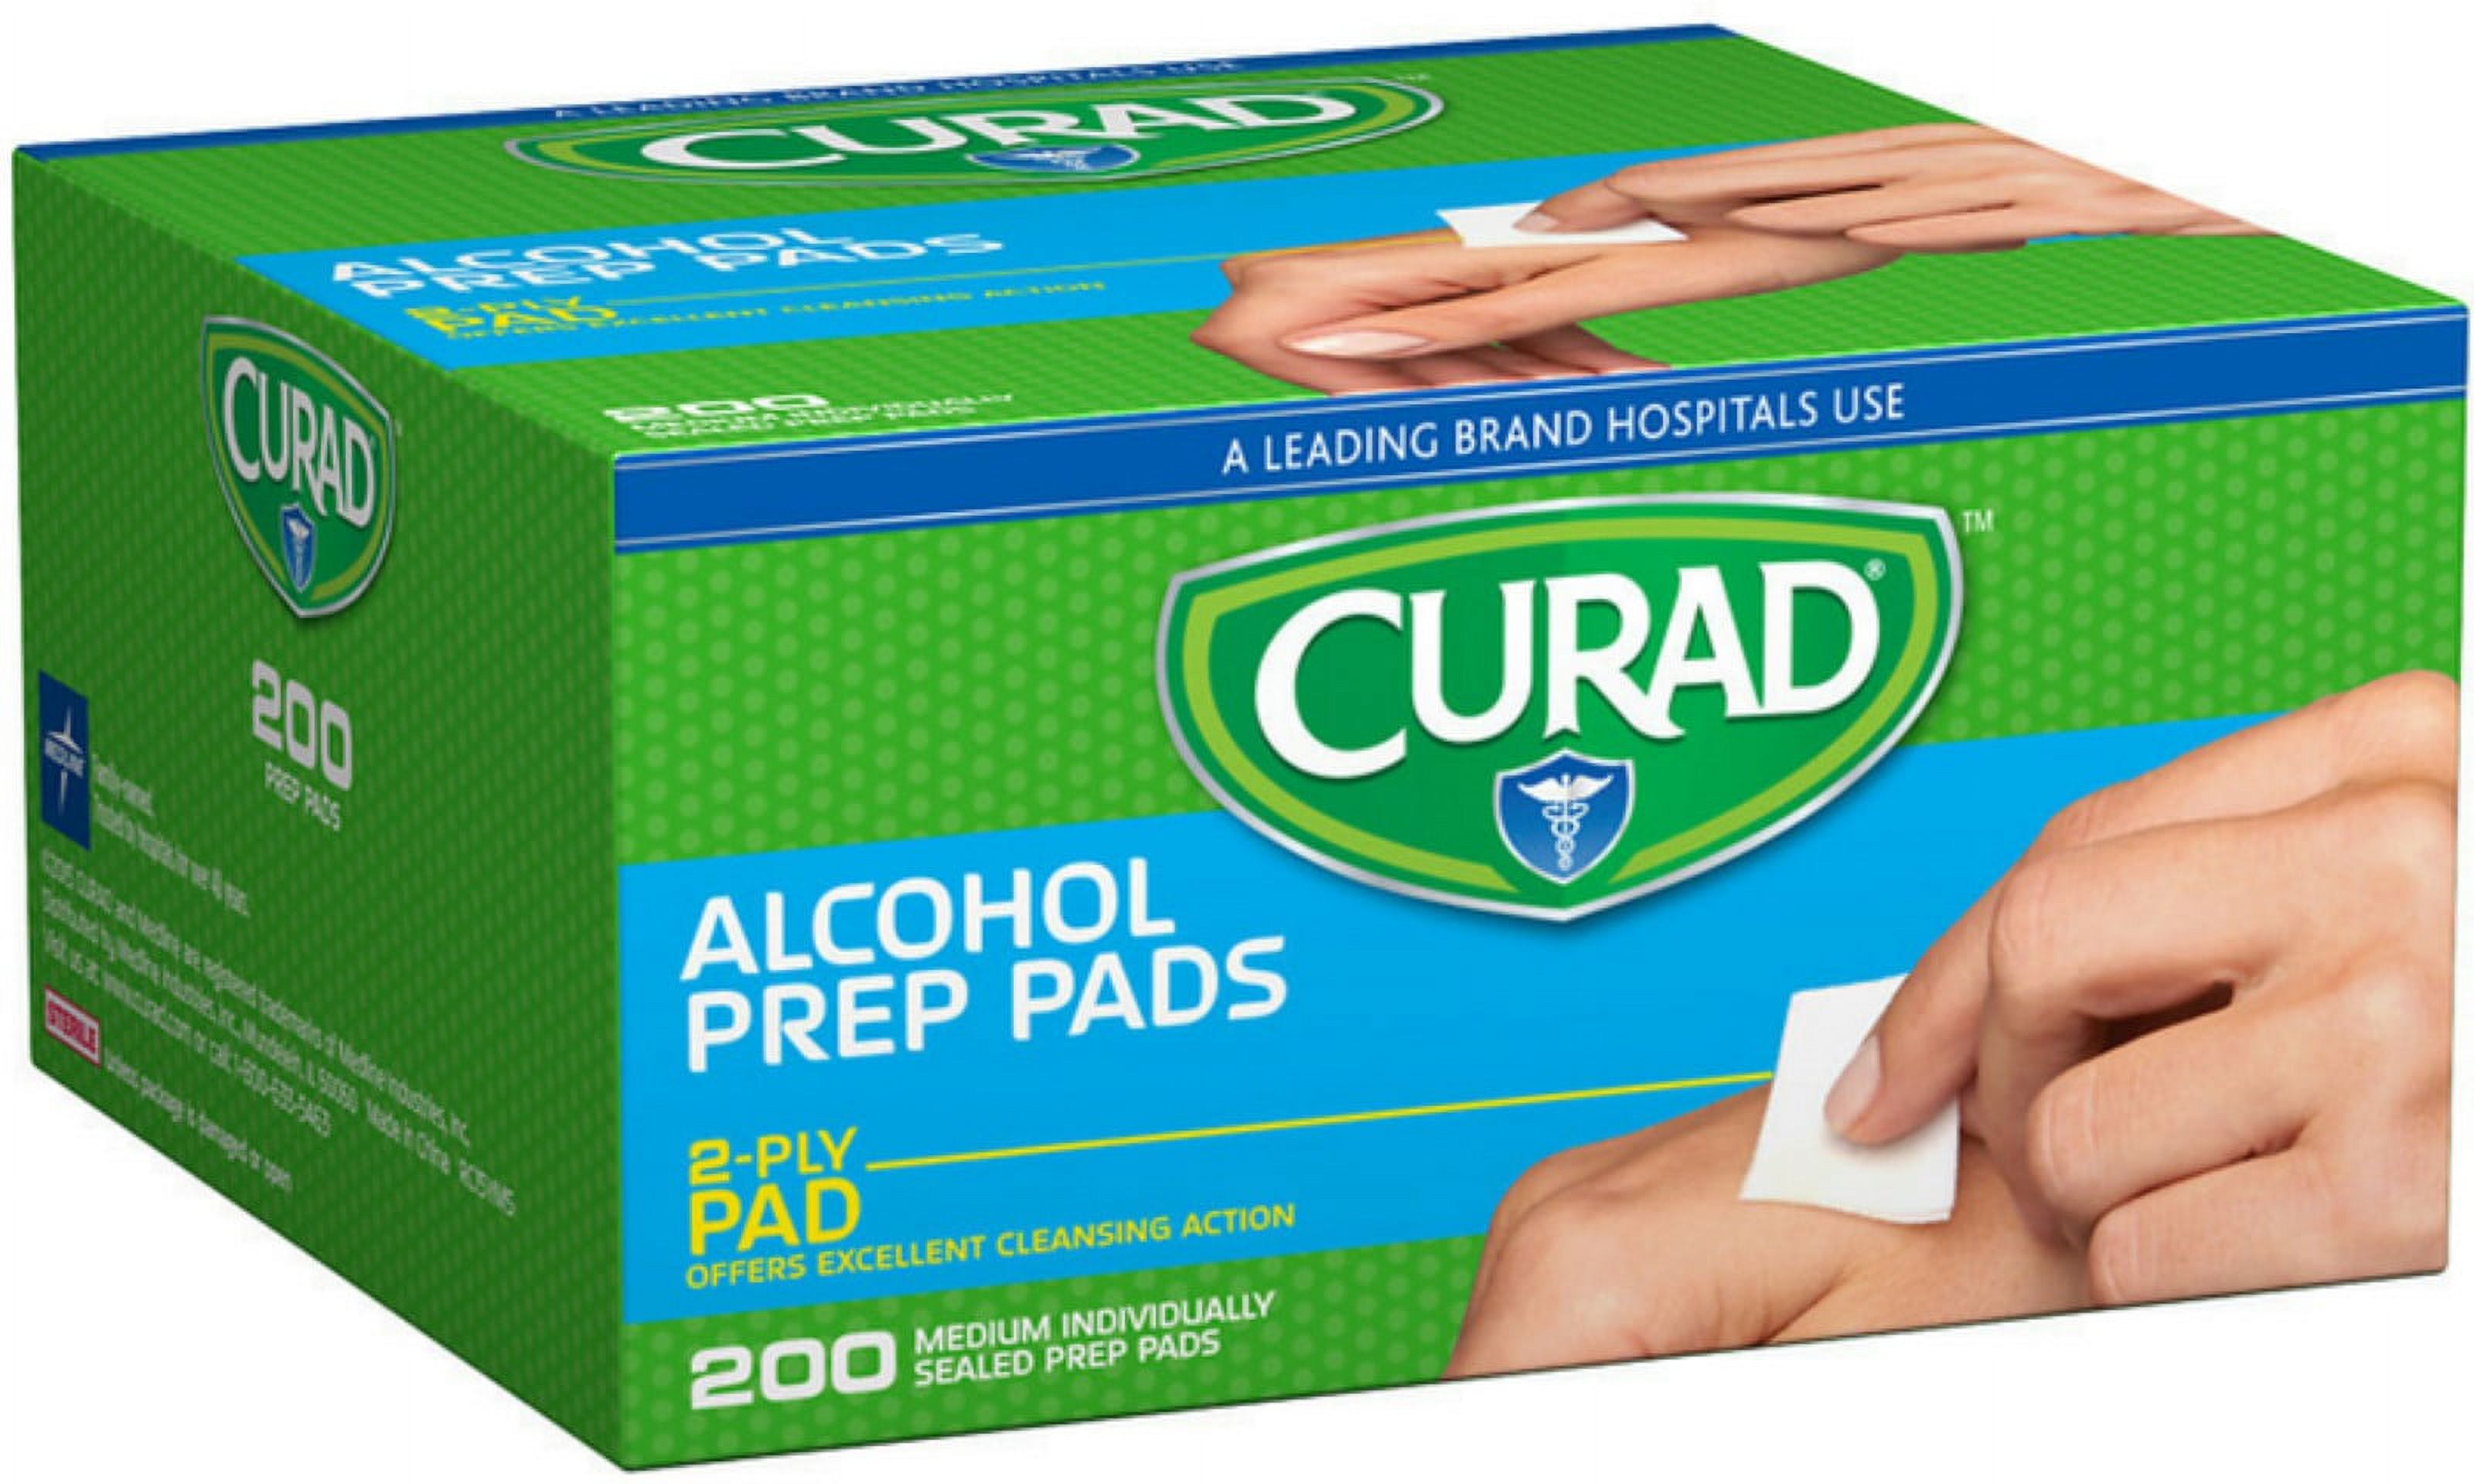 Curad 2-Ply Alcohol Prep Pads, 200 count - image 1 of 4